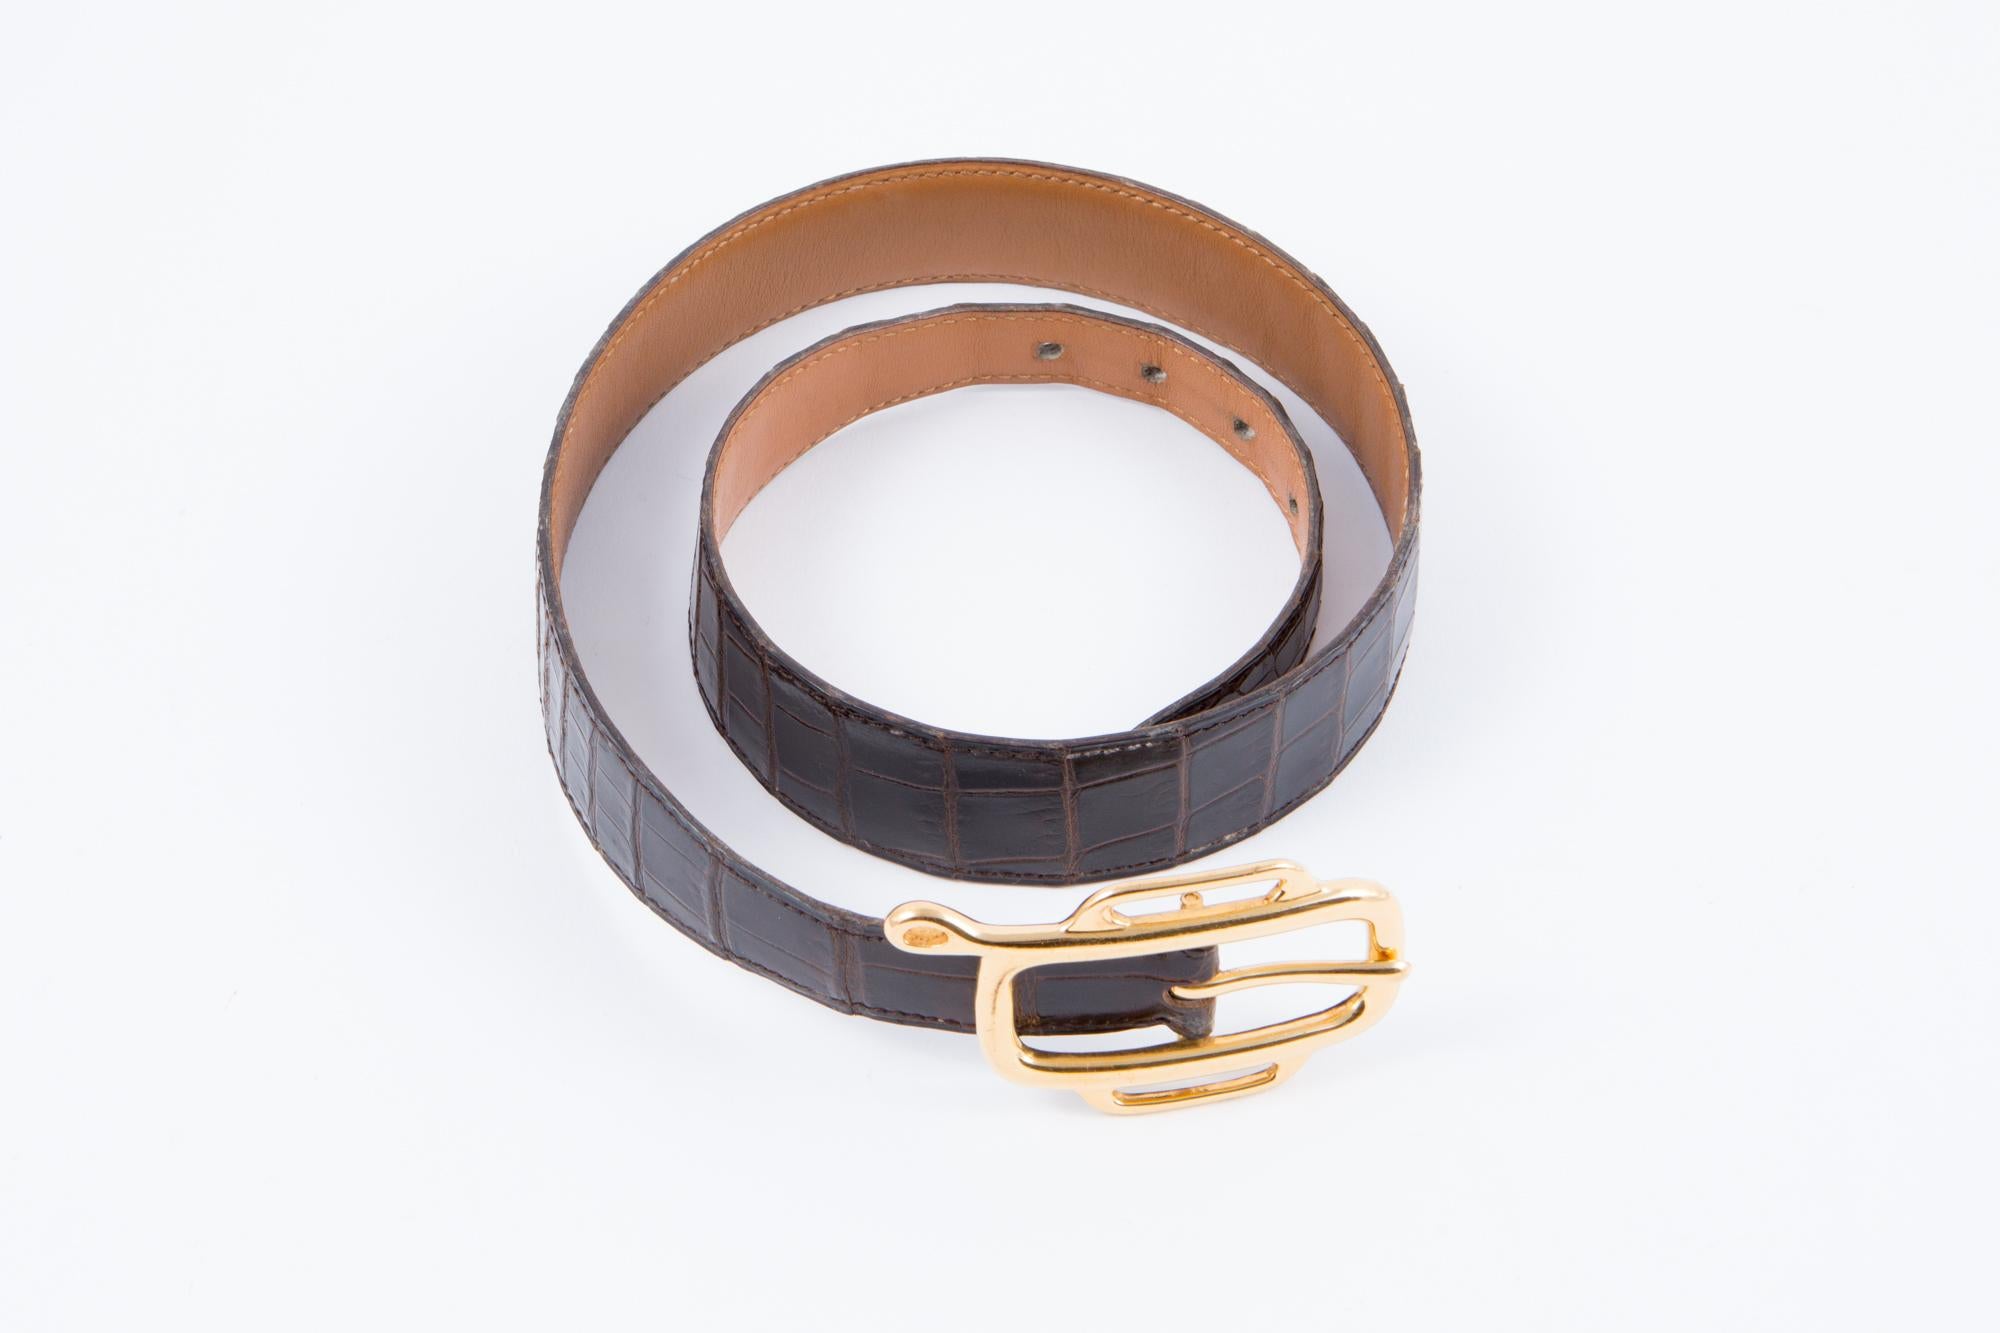 Gorgeous chocolate leather Hermès belt featuring a plated gold hook buckle,  a crocodile effect, a camel inside leather and an inside stamp in gold tone HERMES Paris Made in France 
Length: 31,4 in. (80cm)
Width: 1.18in. (3cm) 
In good vintage